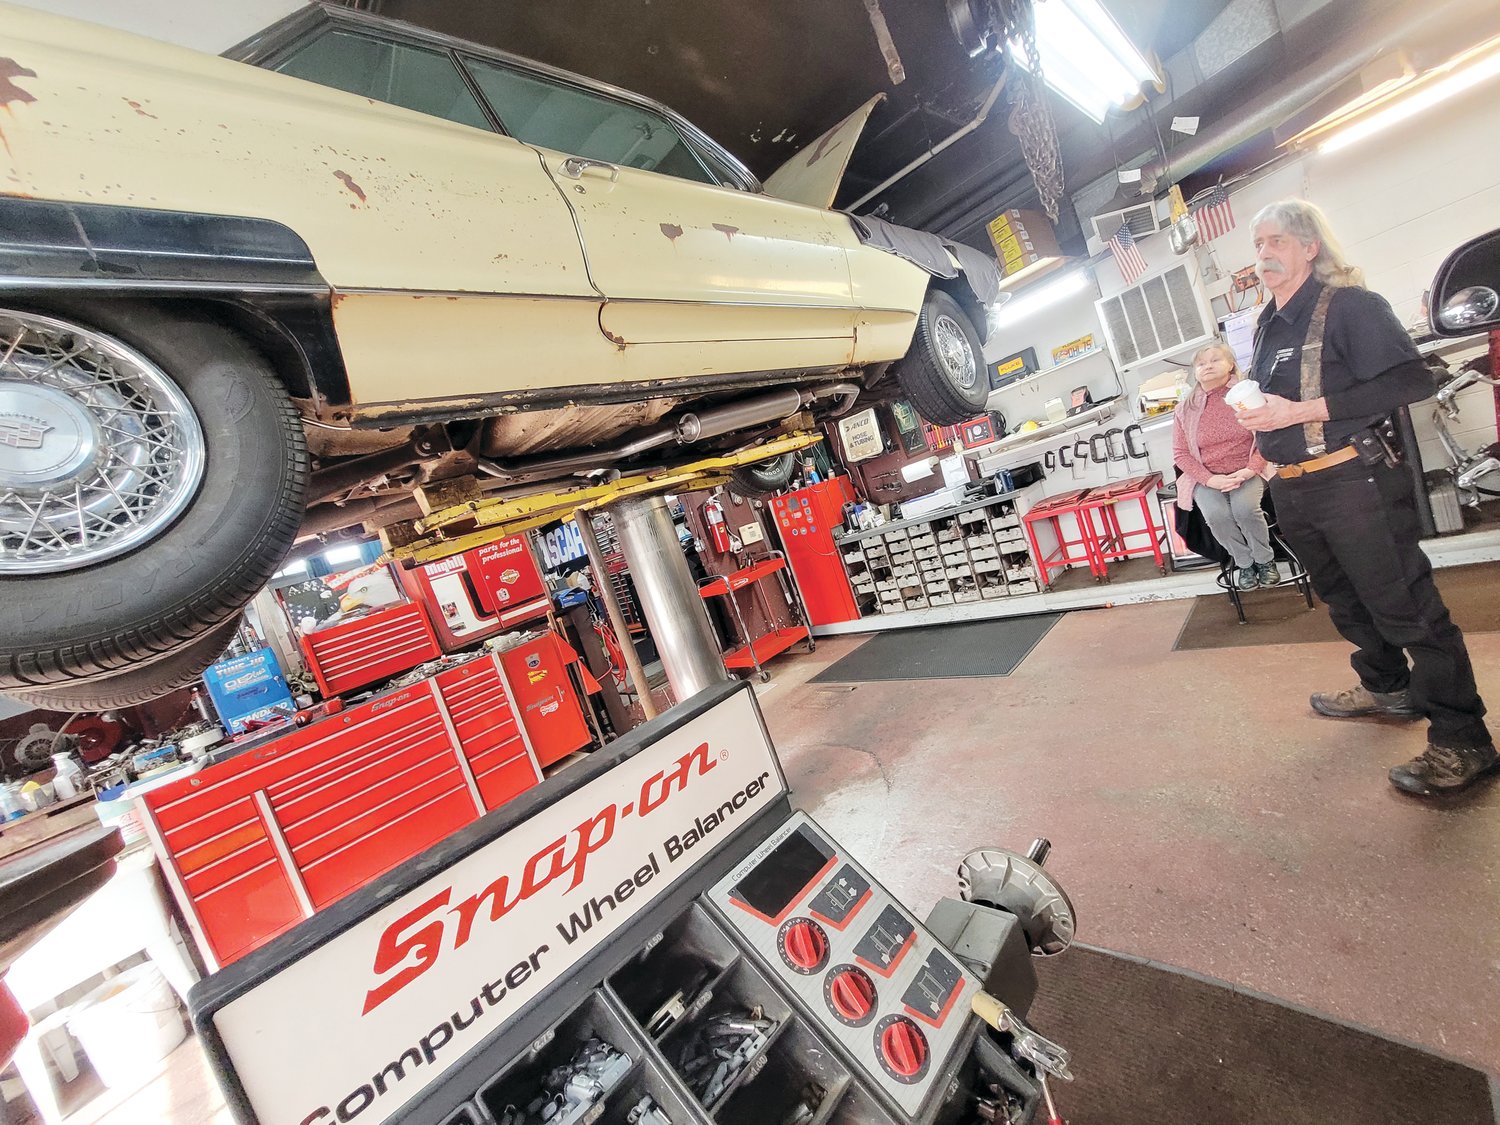 CLINIC CLOSES: Dave Carrara has been twisting wrenches in Johnston for more than 40 years. On May 12, he plans to close his Atwood Avenue shop, Carrara’s Auto Clinic, forever. Here he stands underneath a ’62 Cadillac Coup deVille he’s restoring for a client. Carrara plans to spend more time hunting, fishing and playing with his grandchildren.